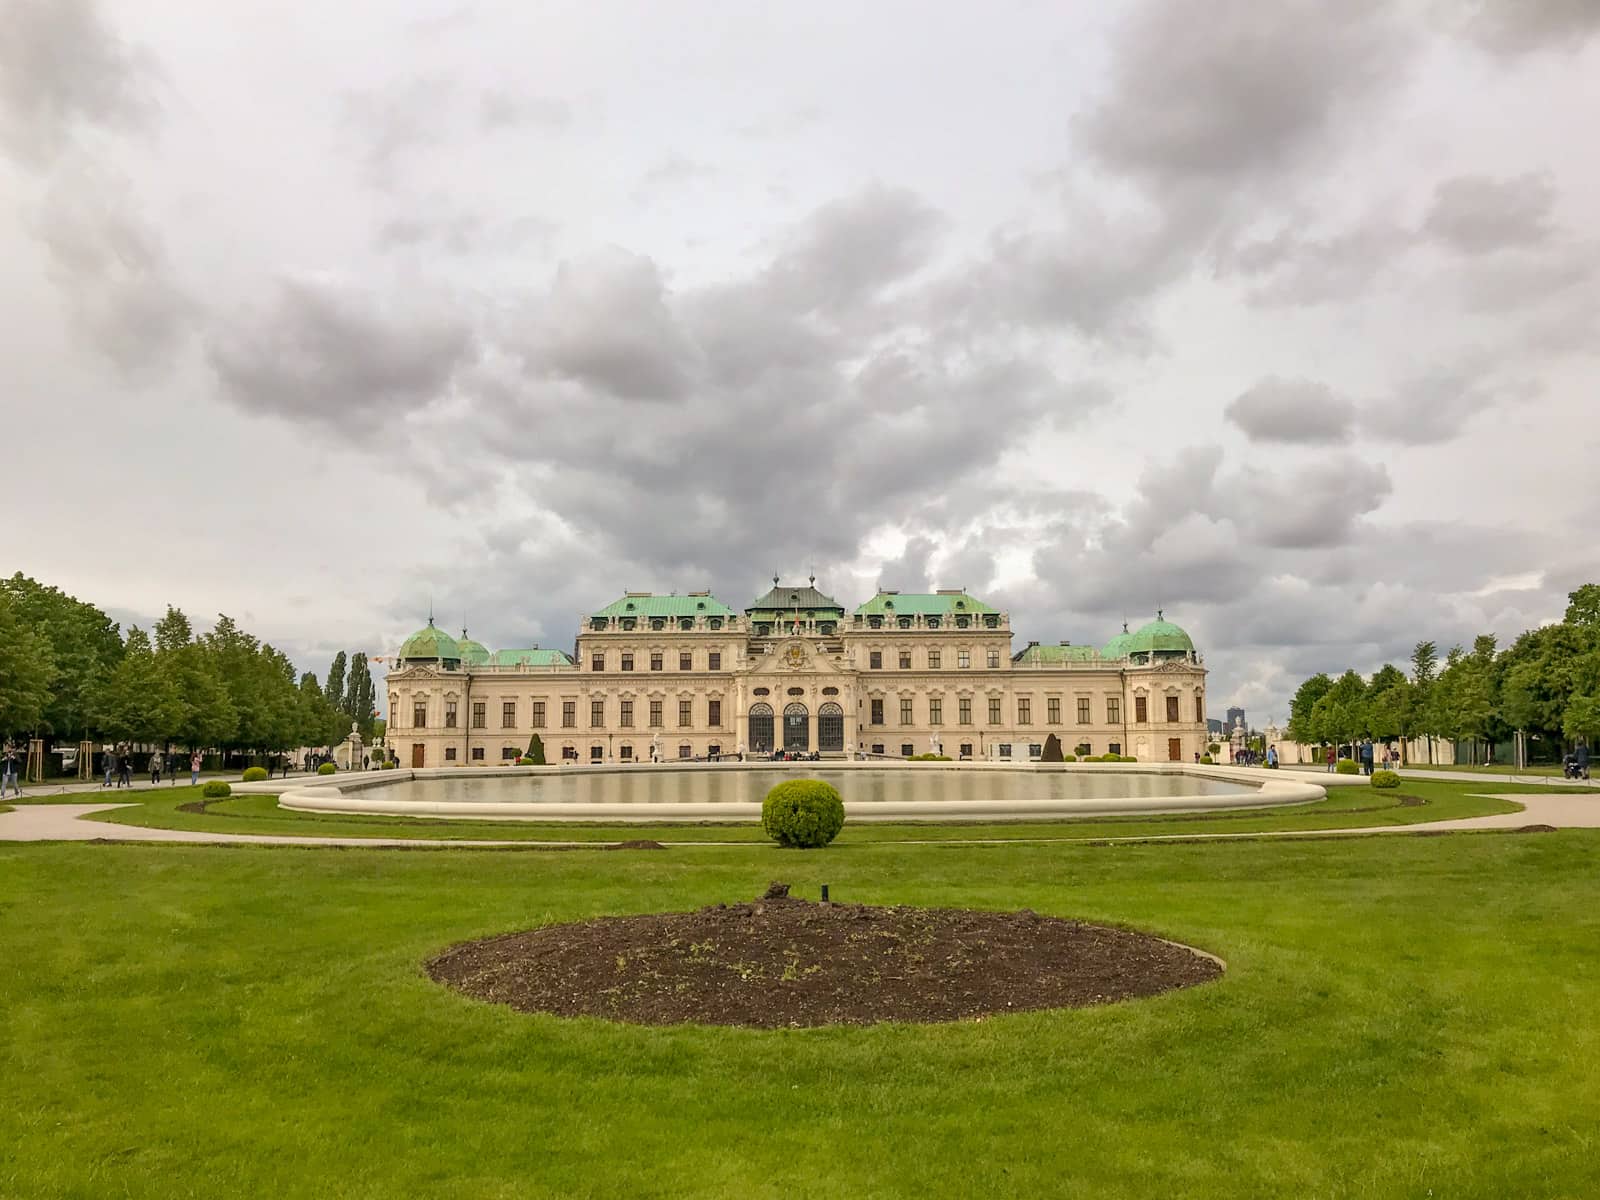 The grounds of Schlössgarten, showing an old, long building with green roofs. There is a man-made giant pond in front of it.